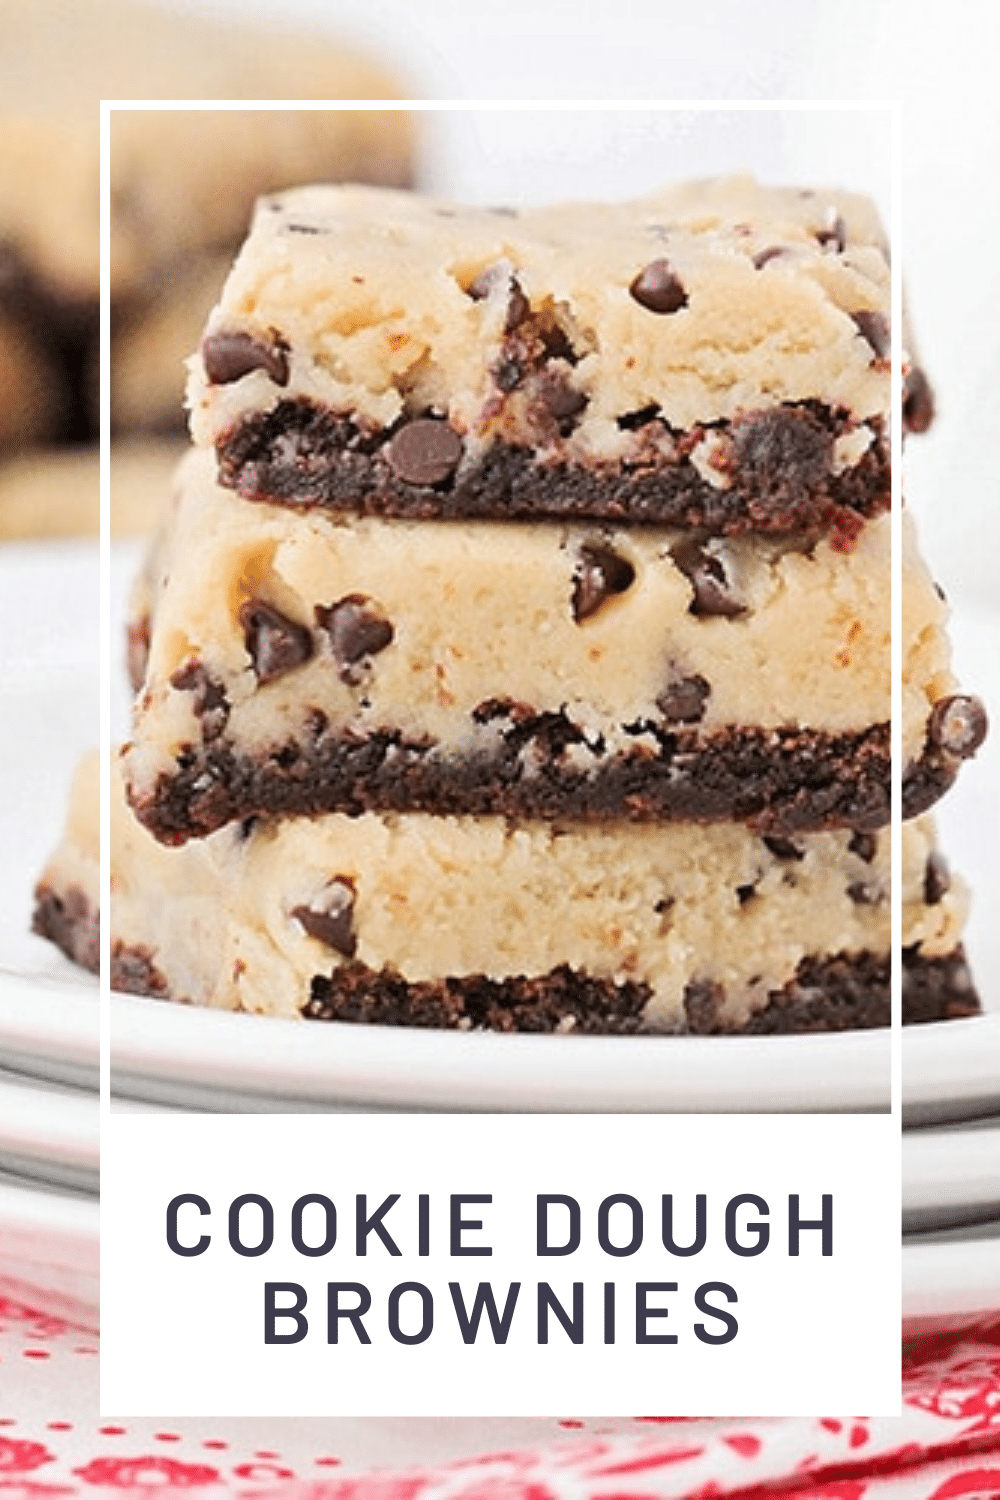 These cookie dough brownies are so rich and decadent! A fudgy chocolate brownie layer topped with eggless cookie dough, for an unforgettable dessert! They are the perfect combination of my two favorite treats; brownies and chocolate chip cookies. via @somewhatsimple